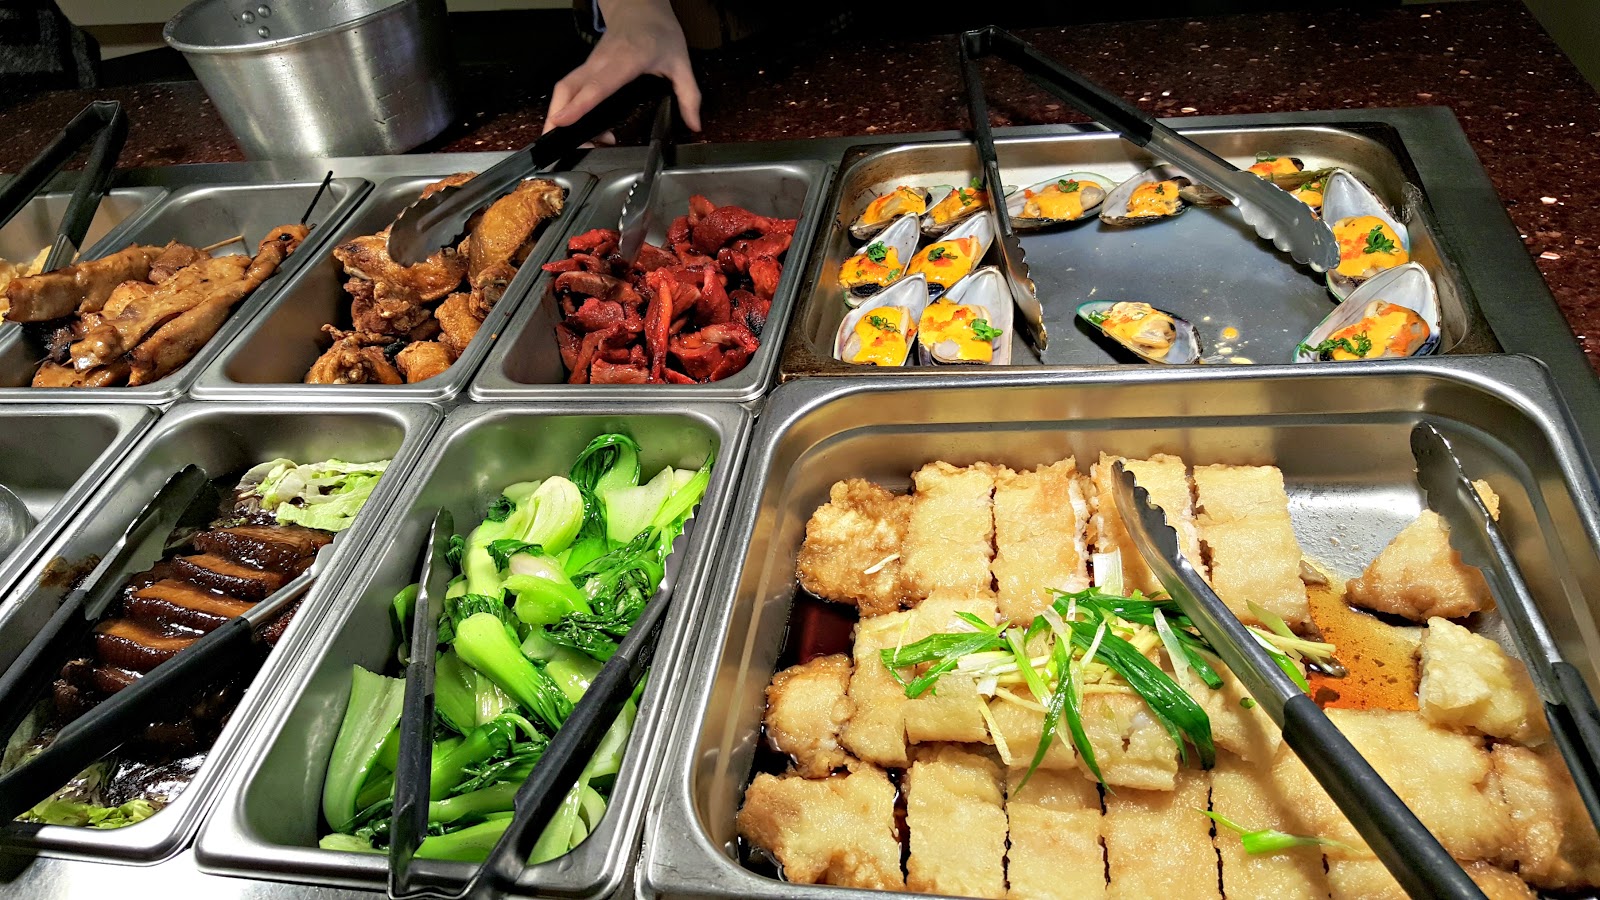 Chinese Buffet Restaurants Near Me That Deliver - Latest Buffet Ideas